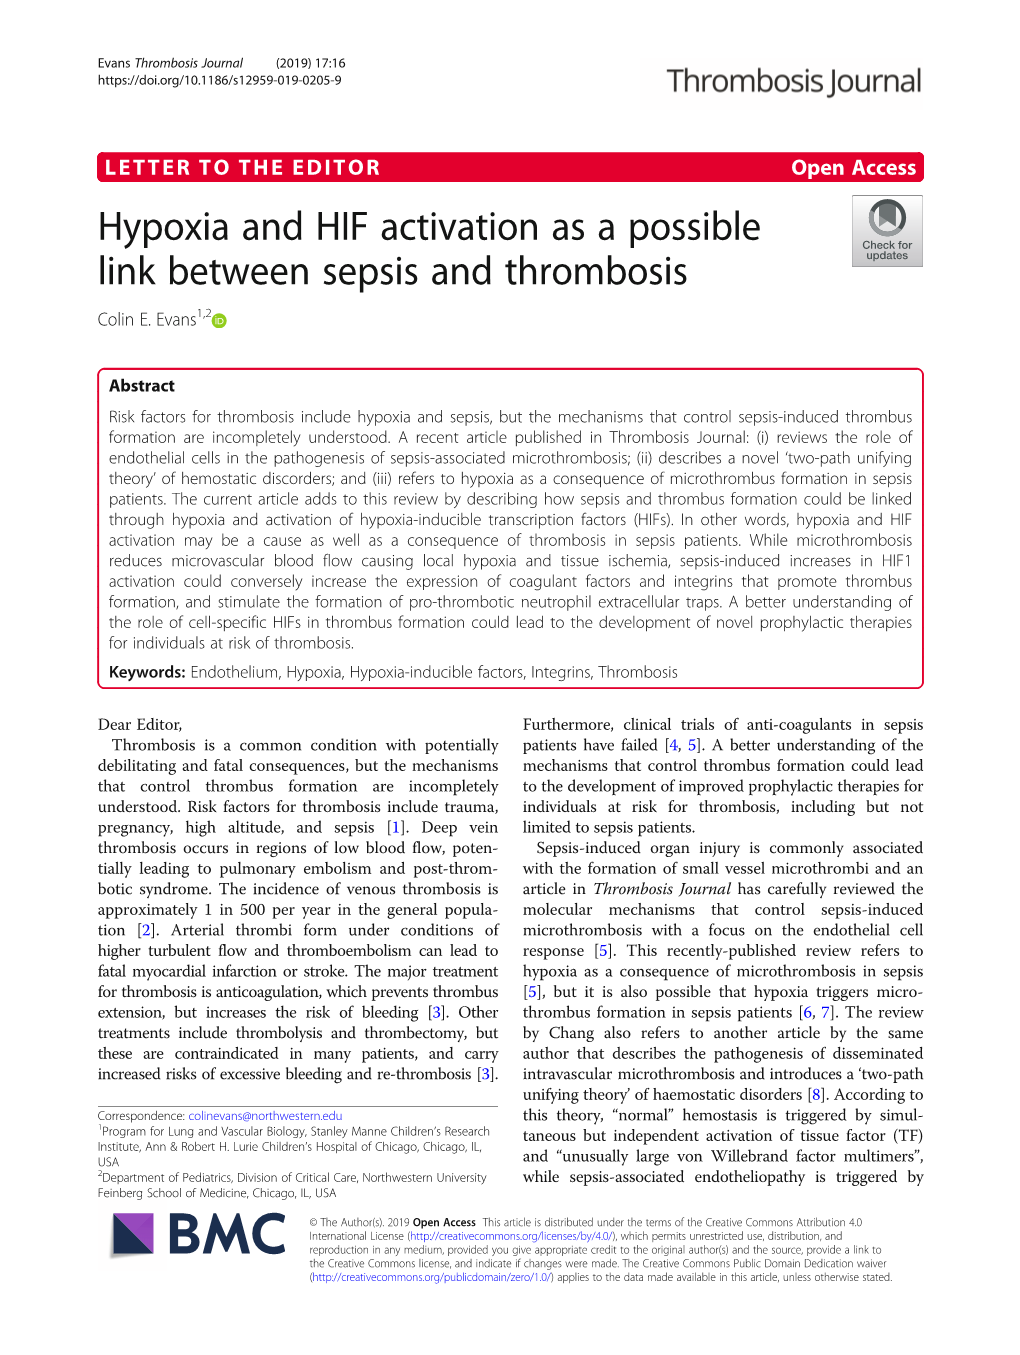 Hypoxia and HIF Activation As a Possible Link Between Sepsis and Thrombosis Colin E